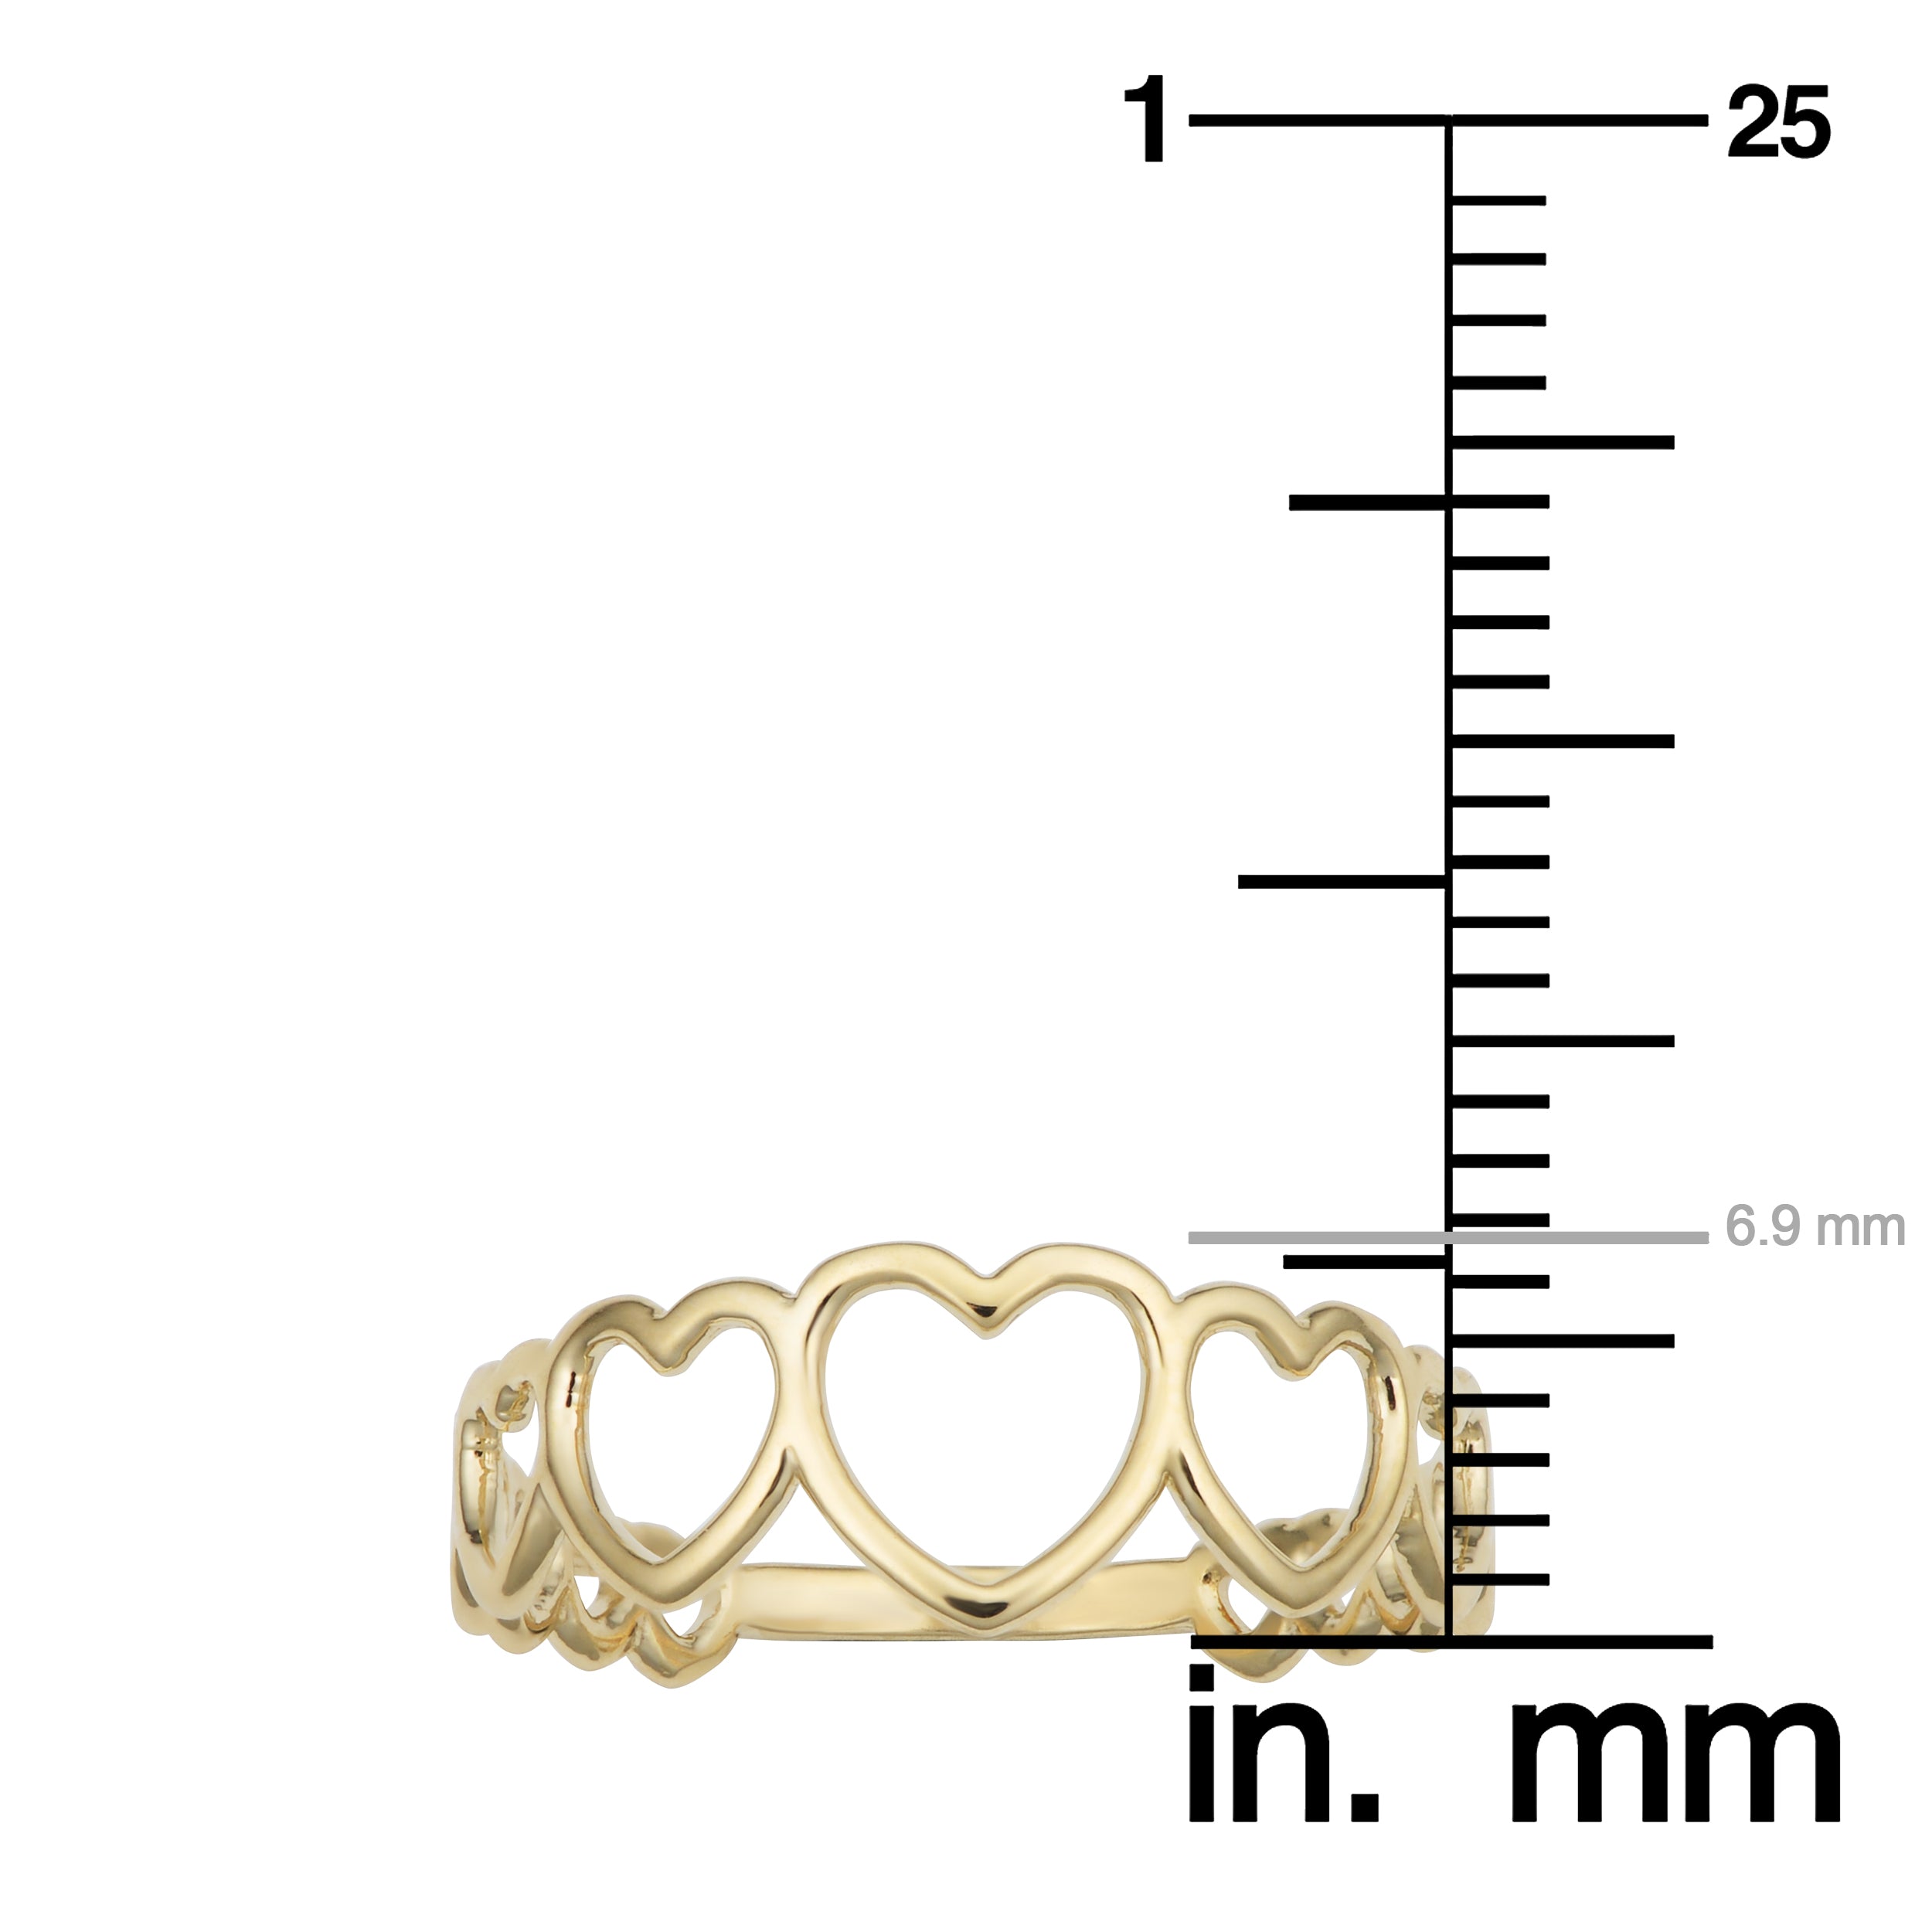 14k Yellow Gold Hearts Ring fine designer jewelry for men and women